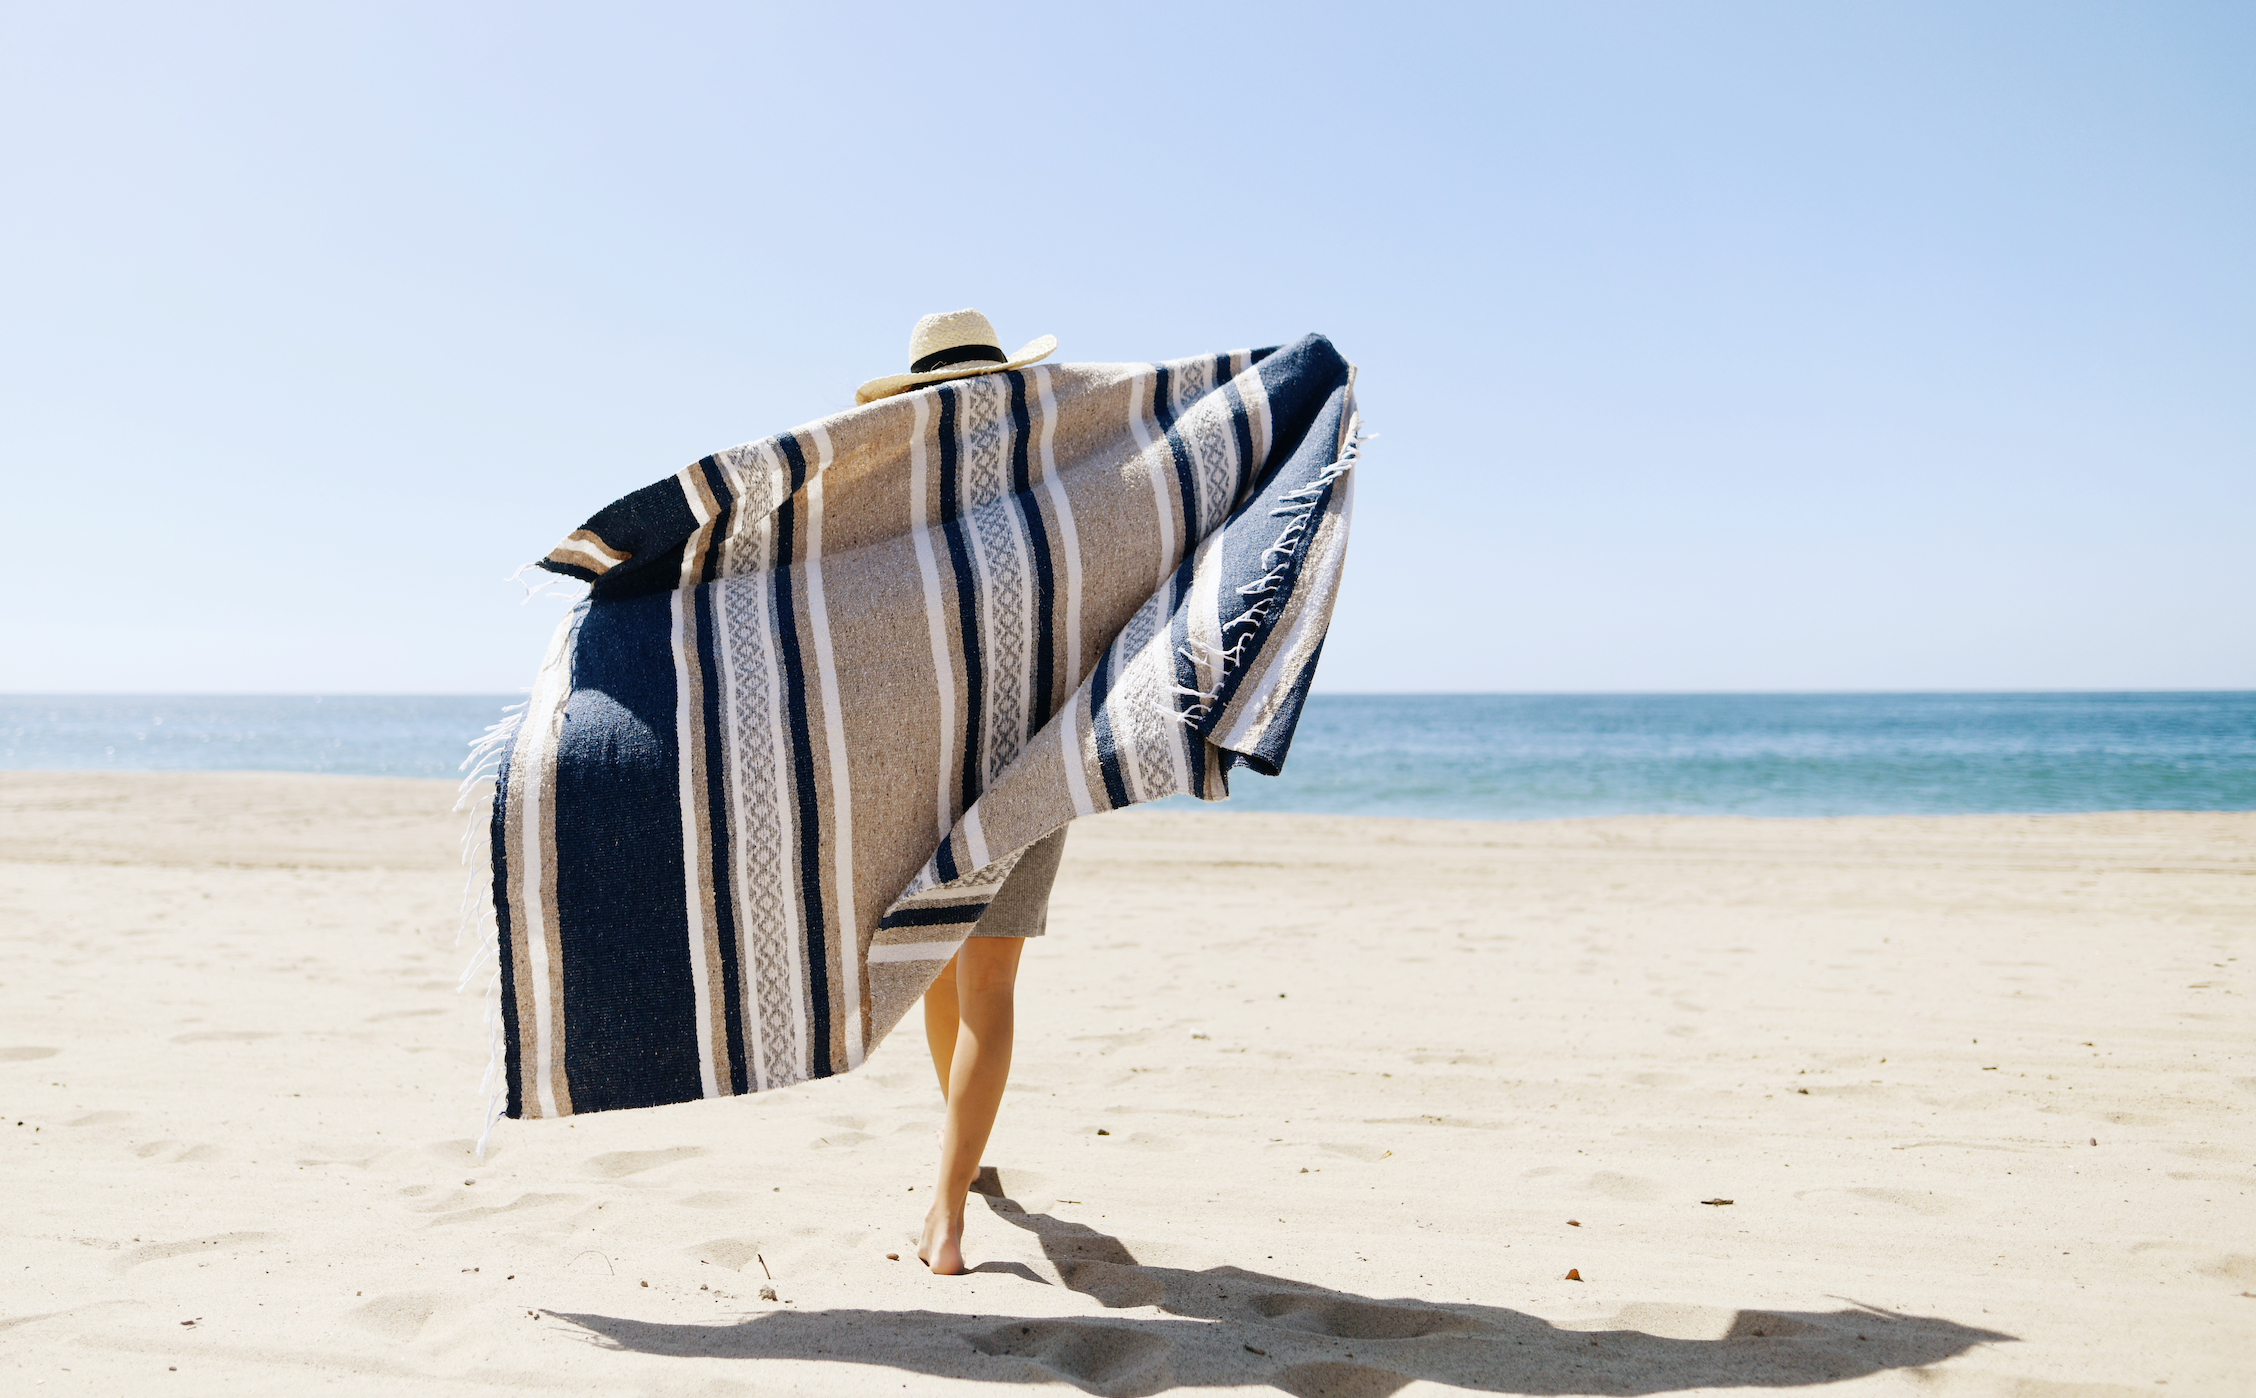 A woman walking on the beach draped in a Mexican Blanket.